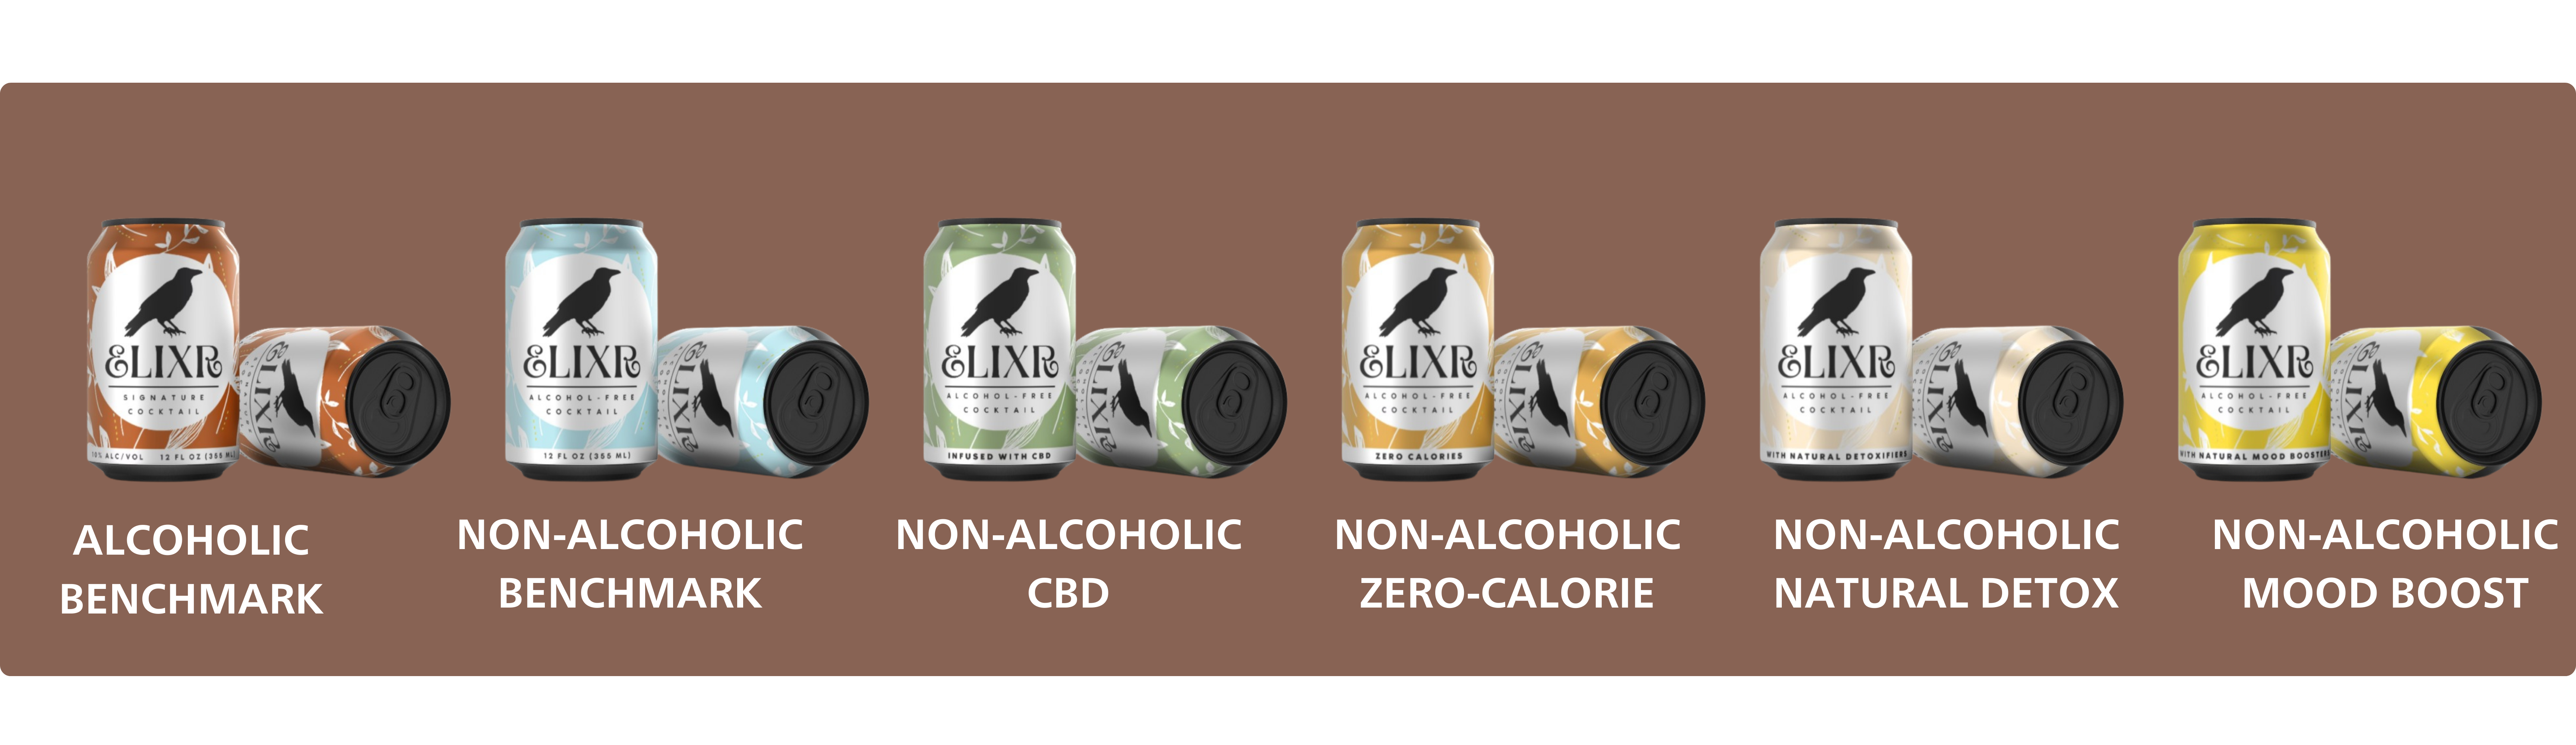 Fictional Elixr canned cocktail variation tested. Alcoholic and non alcoholic bench mark. 